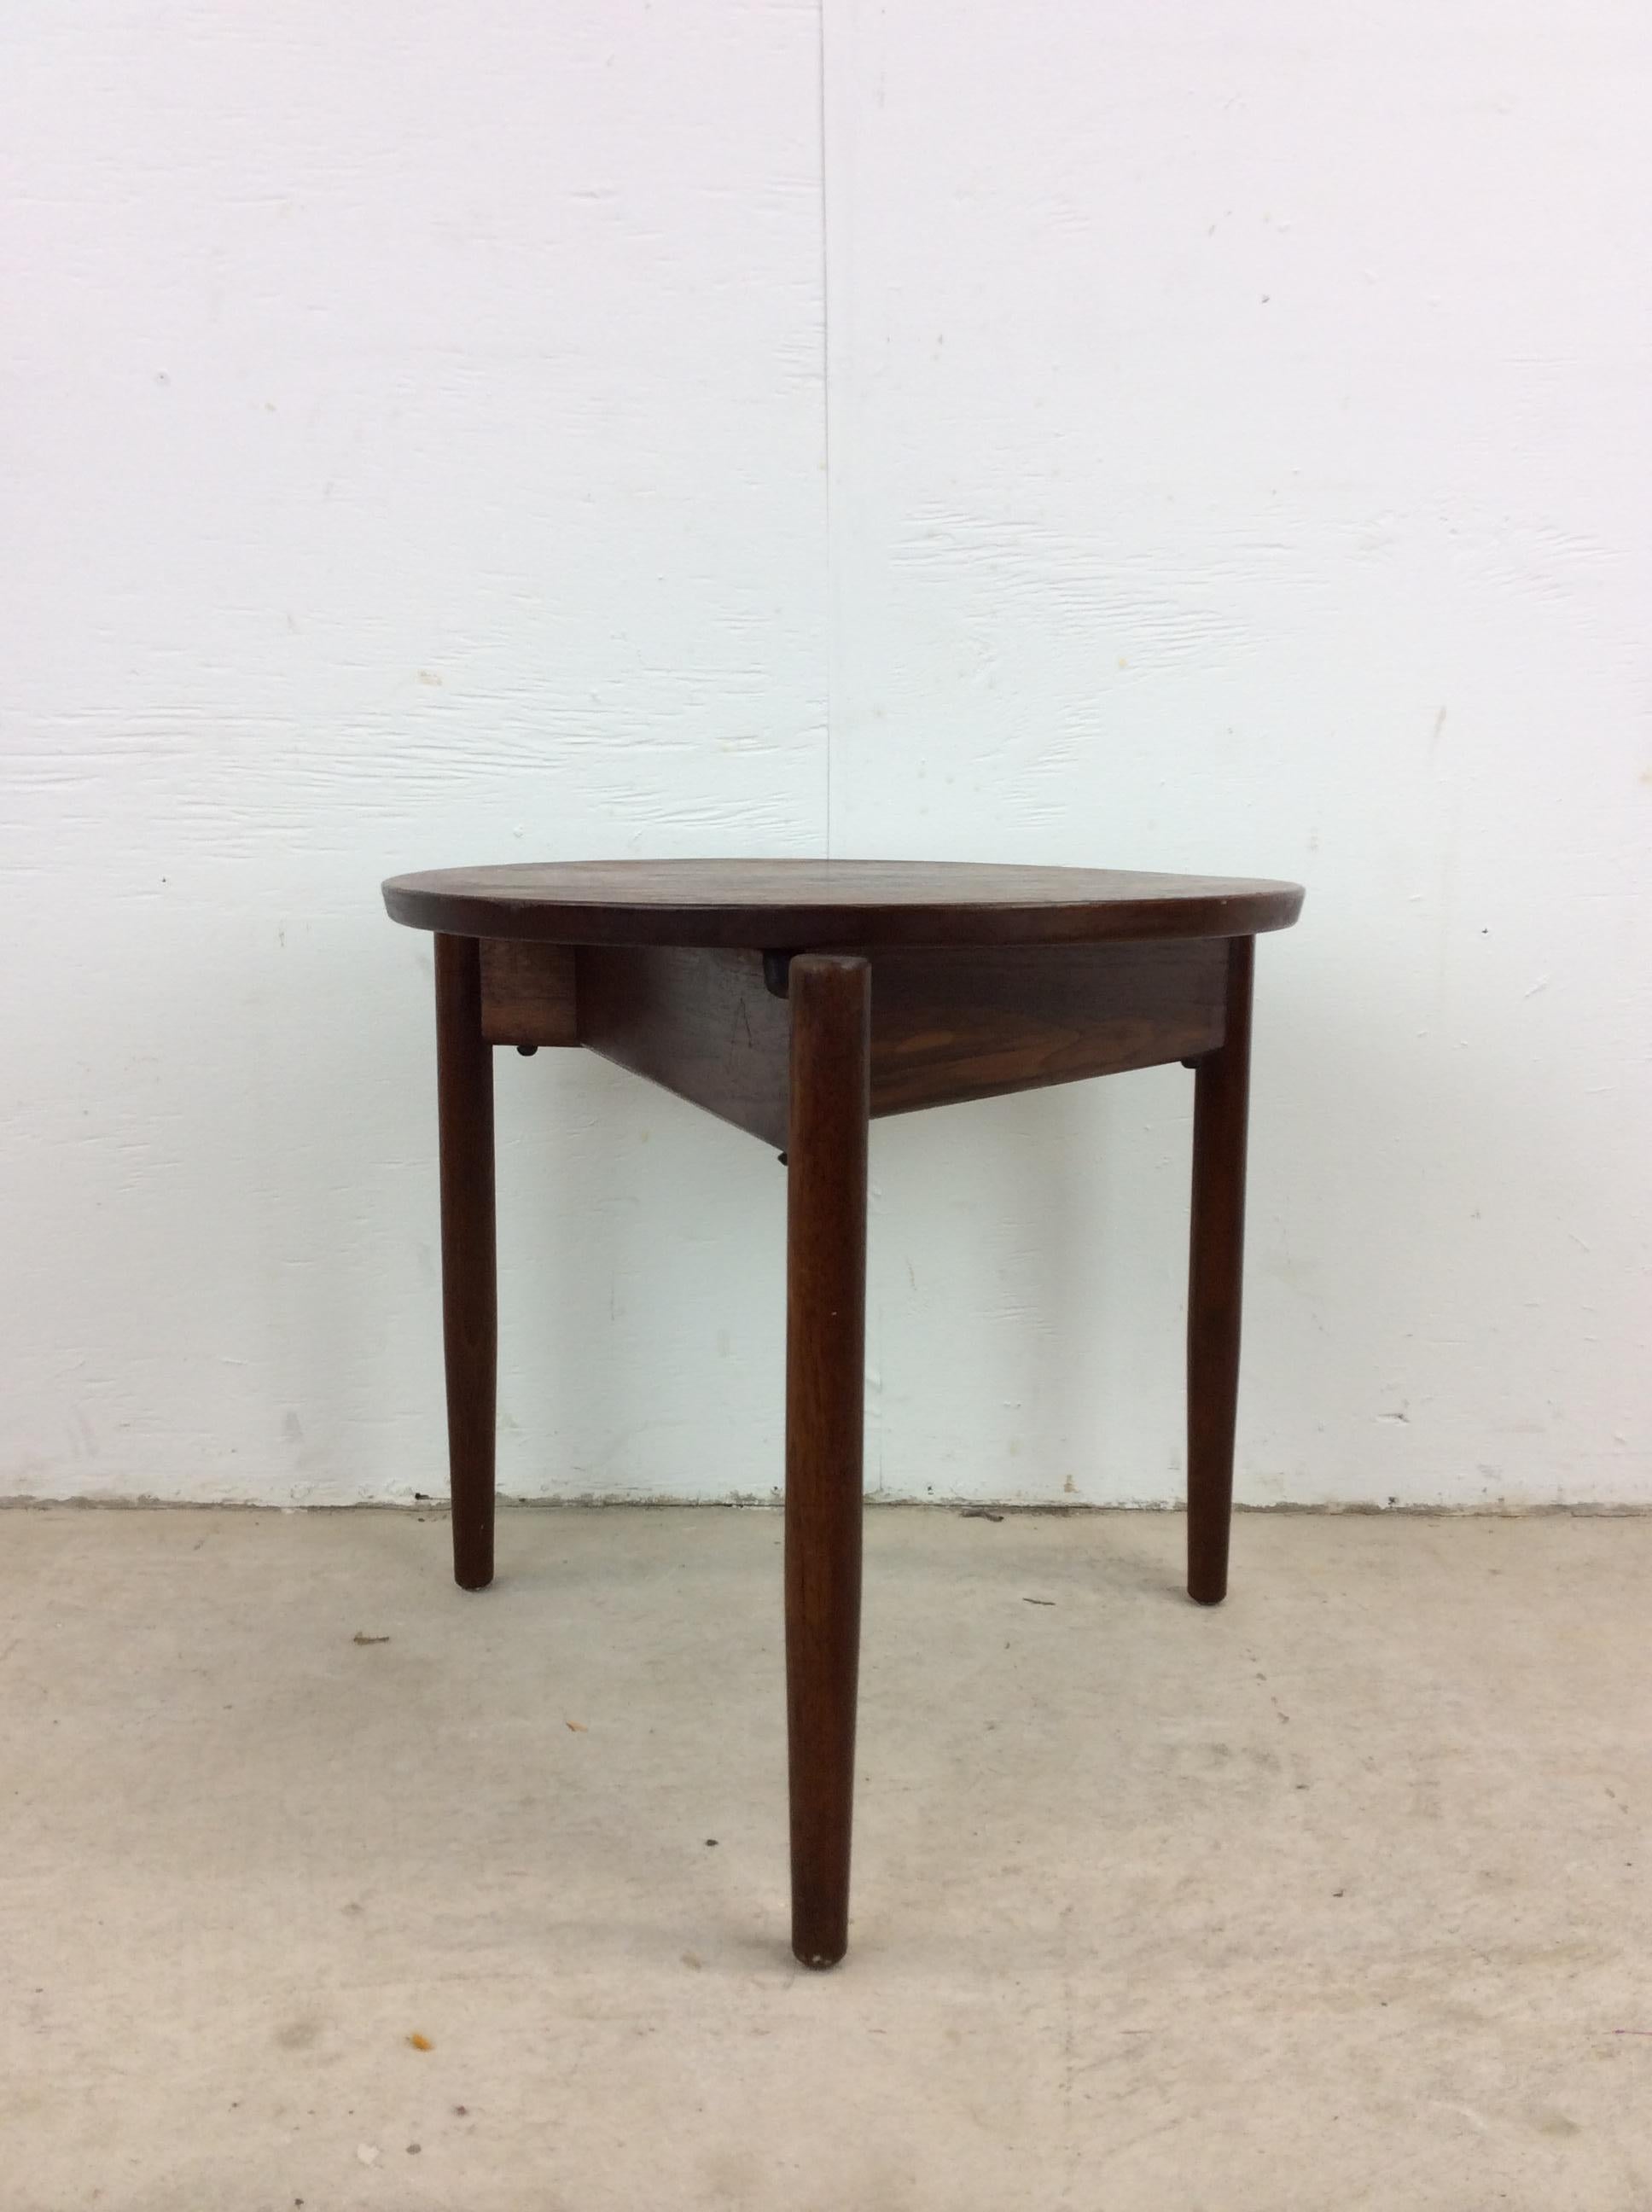 This mid century modern stool features hardwood construction, original walnut finish, round hardwood top, and three tapered legs.

Dimensions: 18diameter 20w with legs 17.25h

Condition: Original walnut finish is in good condition with only minor